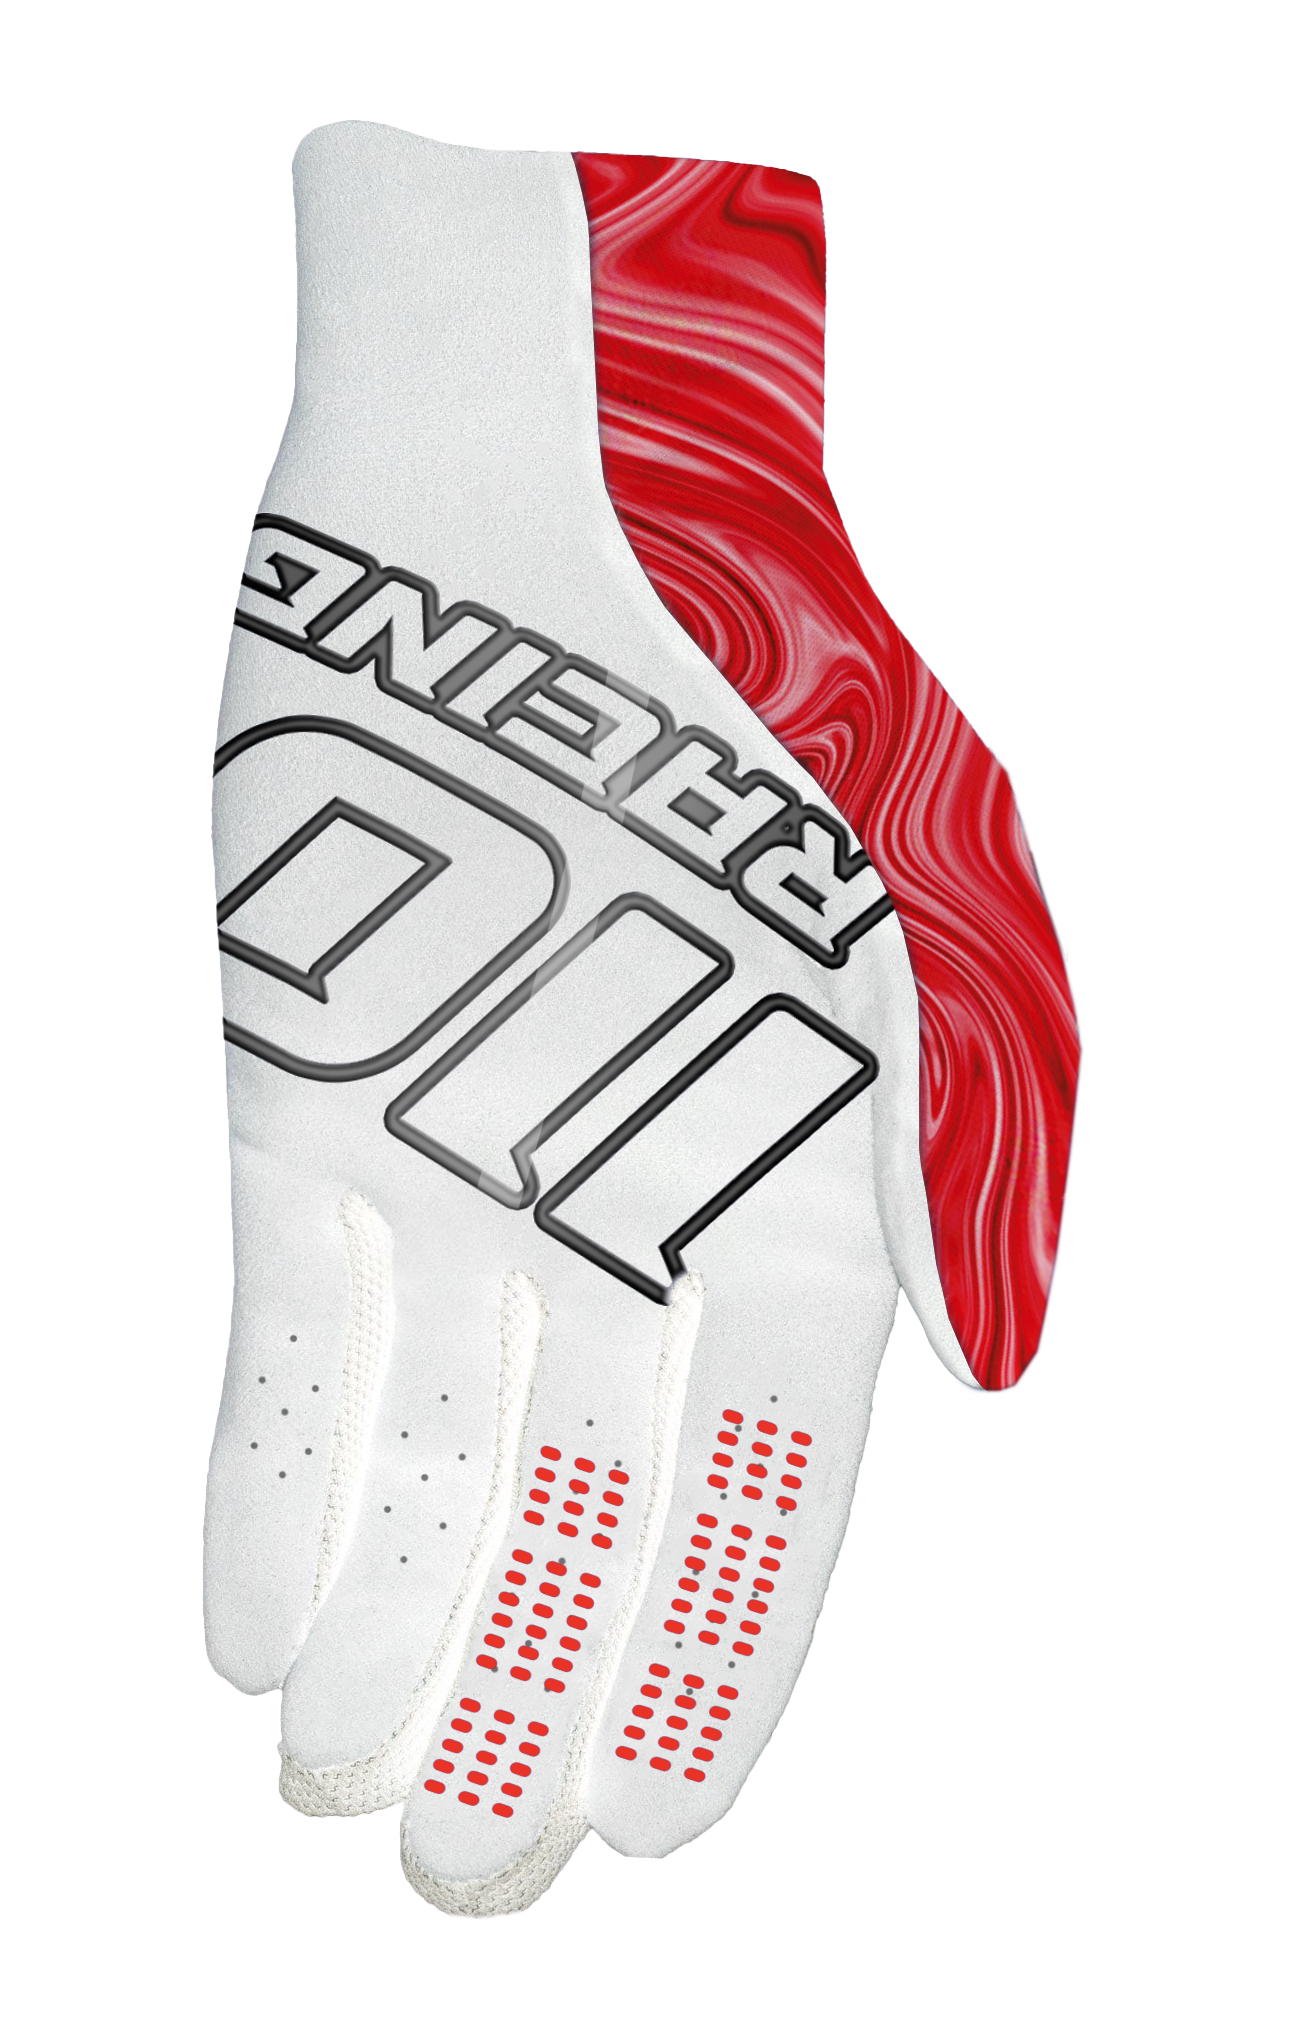 110 RACING // SE23 GRAPHITE YOUTH GLOVE - GREY/RED